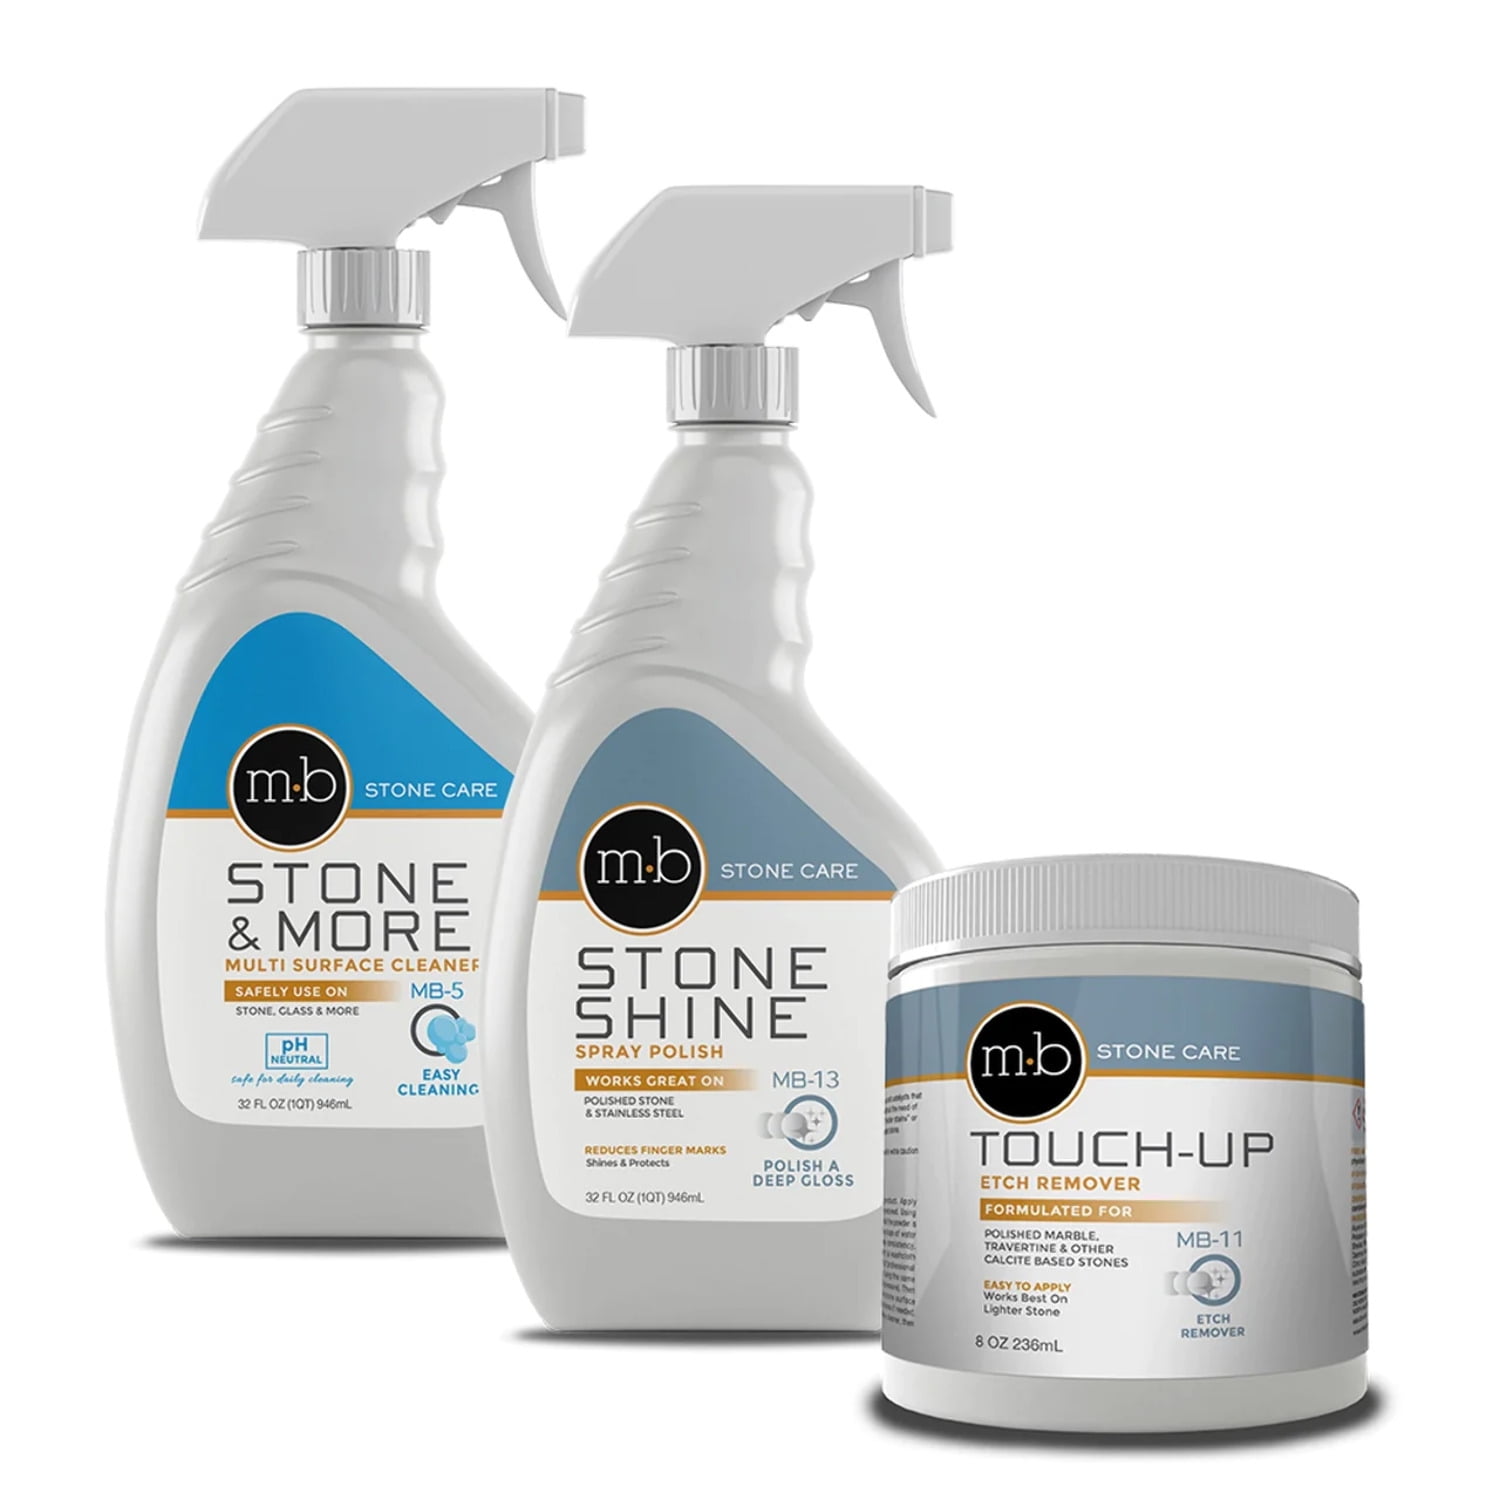 MB Stone Care Marble Repair Kit MB-5 Multi-Surface Cleaner, MB-13 Stone  Shine Spray Polish & MB-11 Touch Up Etch Remover Ready to Use Bundle 